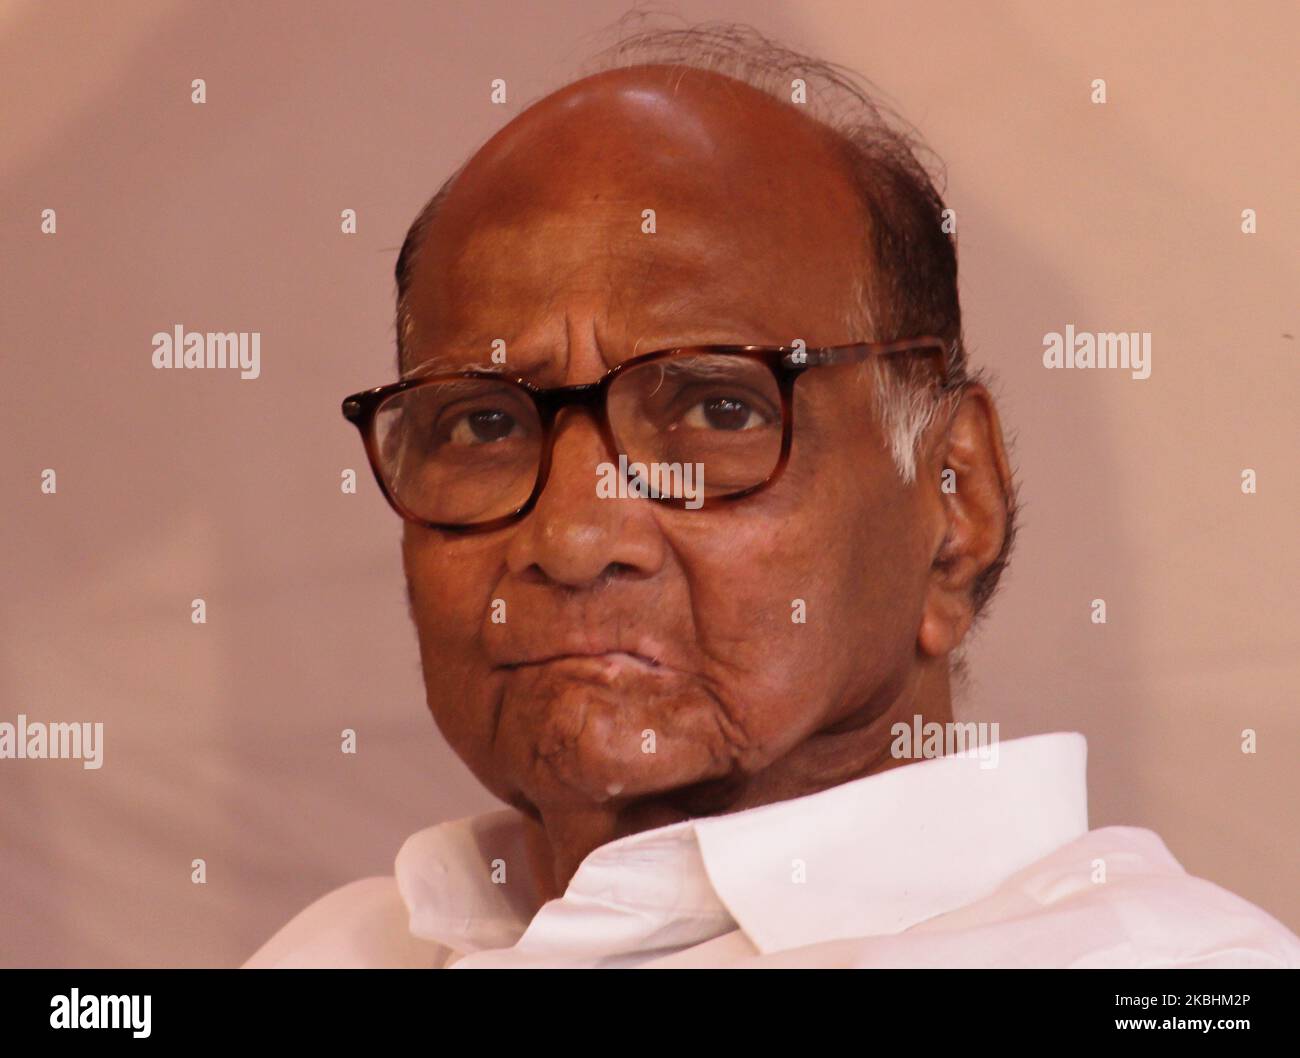 The Nationalist Congress Party (NCP) chief Sharad Pawar looks on during an event on February 23, 2020 in Mumbai, India. (Photo by Himanshu Bhatt/NurPhoto) Stock Photo